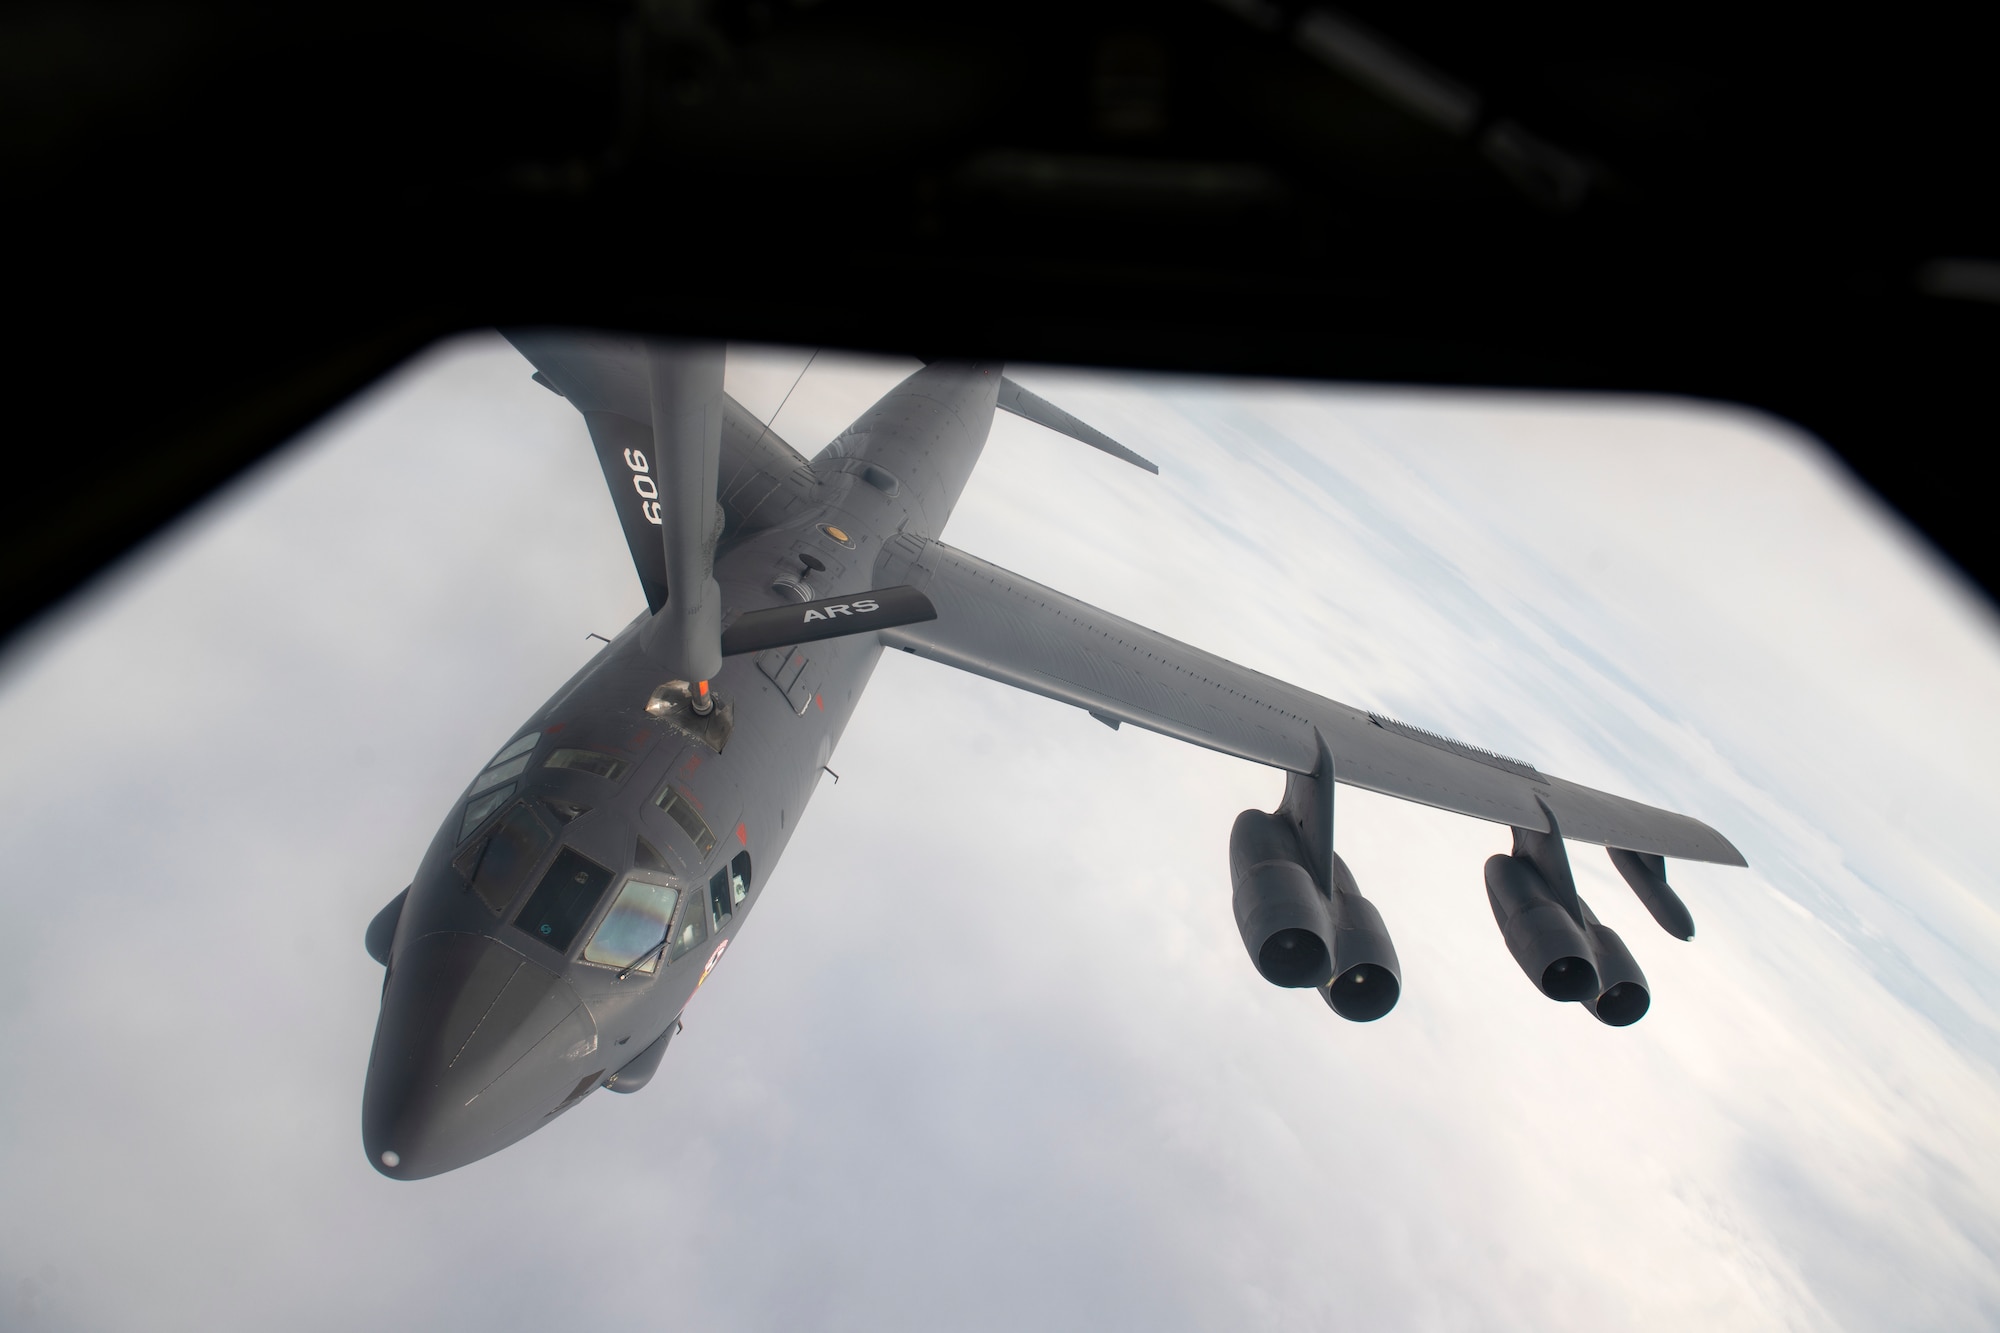 A U.S. Air Force 5th Bomb Wing B-52H Stratofortress receives fuel from a 909th Air Refueling Squadron KC-135 Stratotanker over the Pacific Ocean, Oct. 27, 2022. Aerial refueling capabilities extend airborne training time and combat radius, ensuring U.S. and Allied nation aircraft are postured to maintain regional peace and stability within the Indo-Pacific area of responsibility. (U.S. Air Force photo by Senior Airman Jessi Roth)